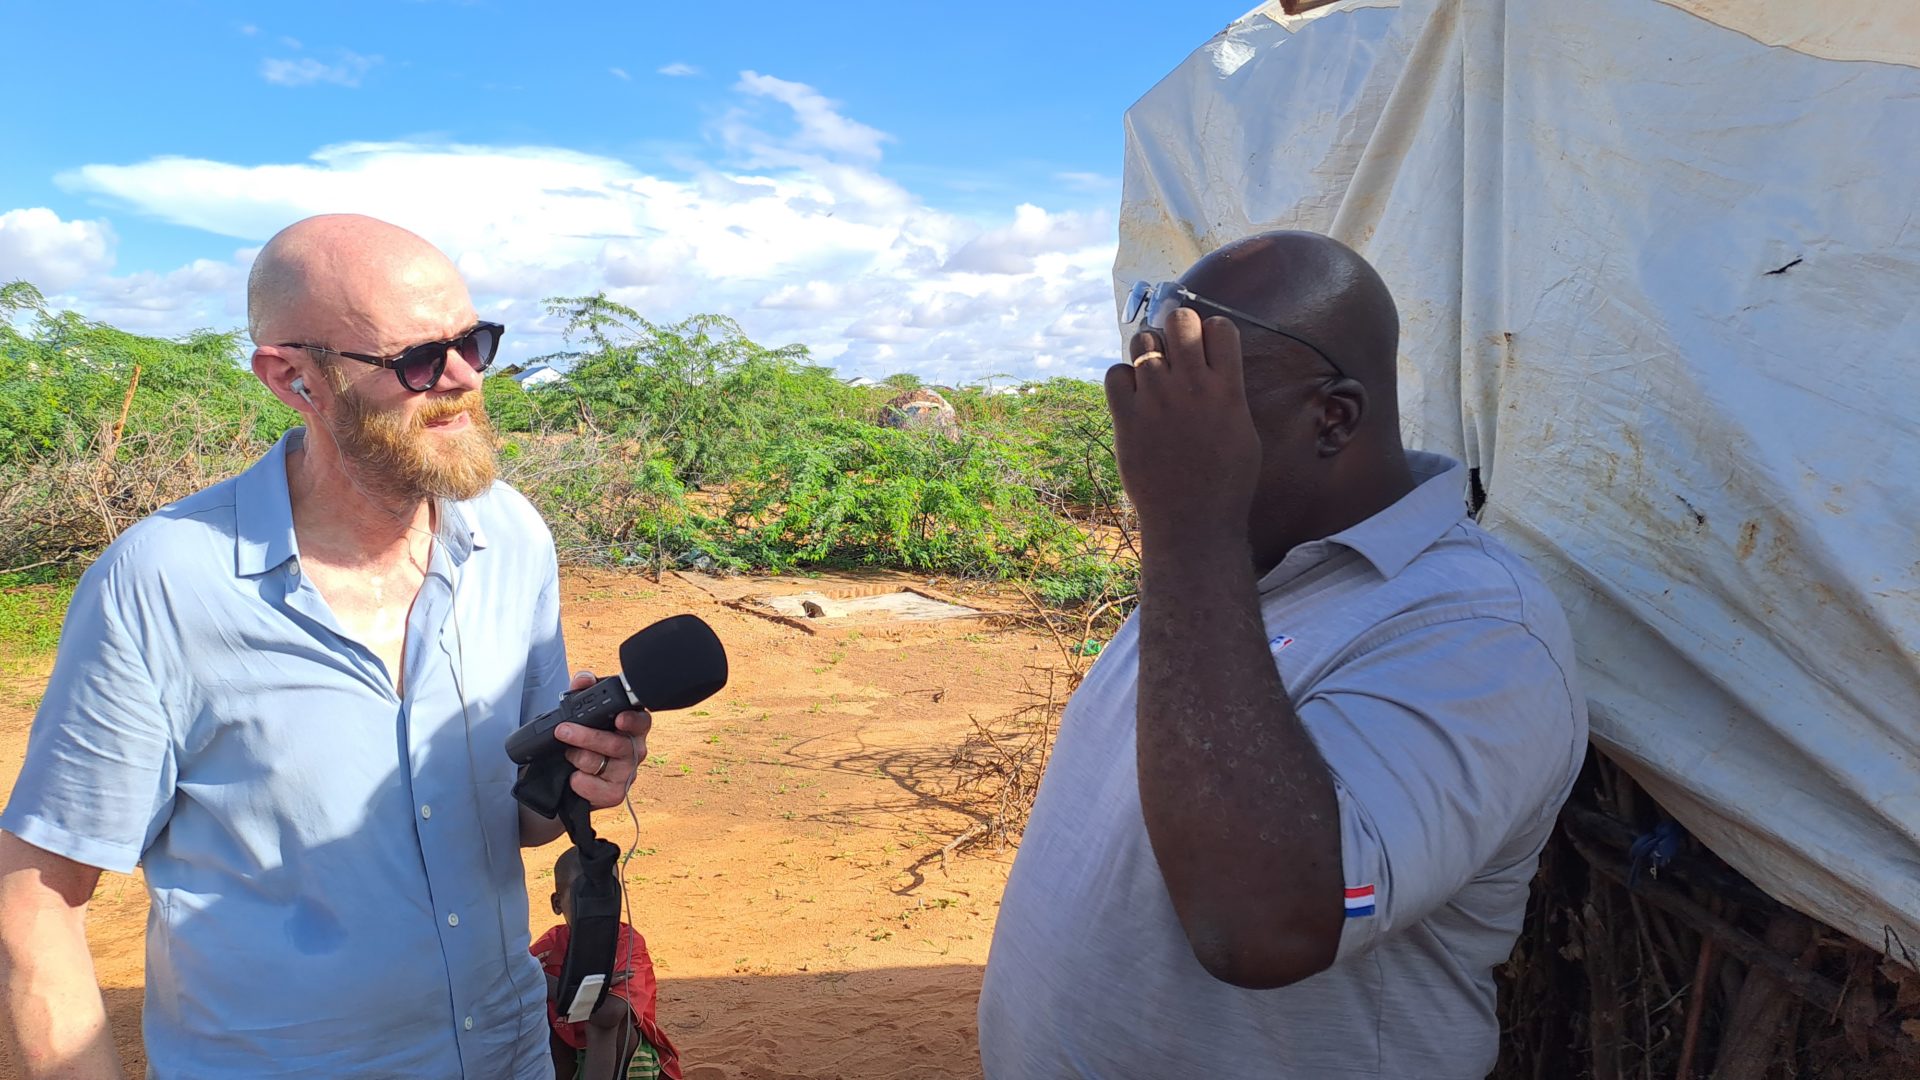 Sean Moncrieff at a camp for Internally Displaced People in Dolo, Somalia